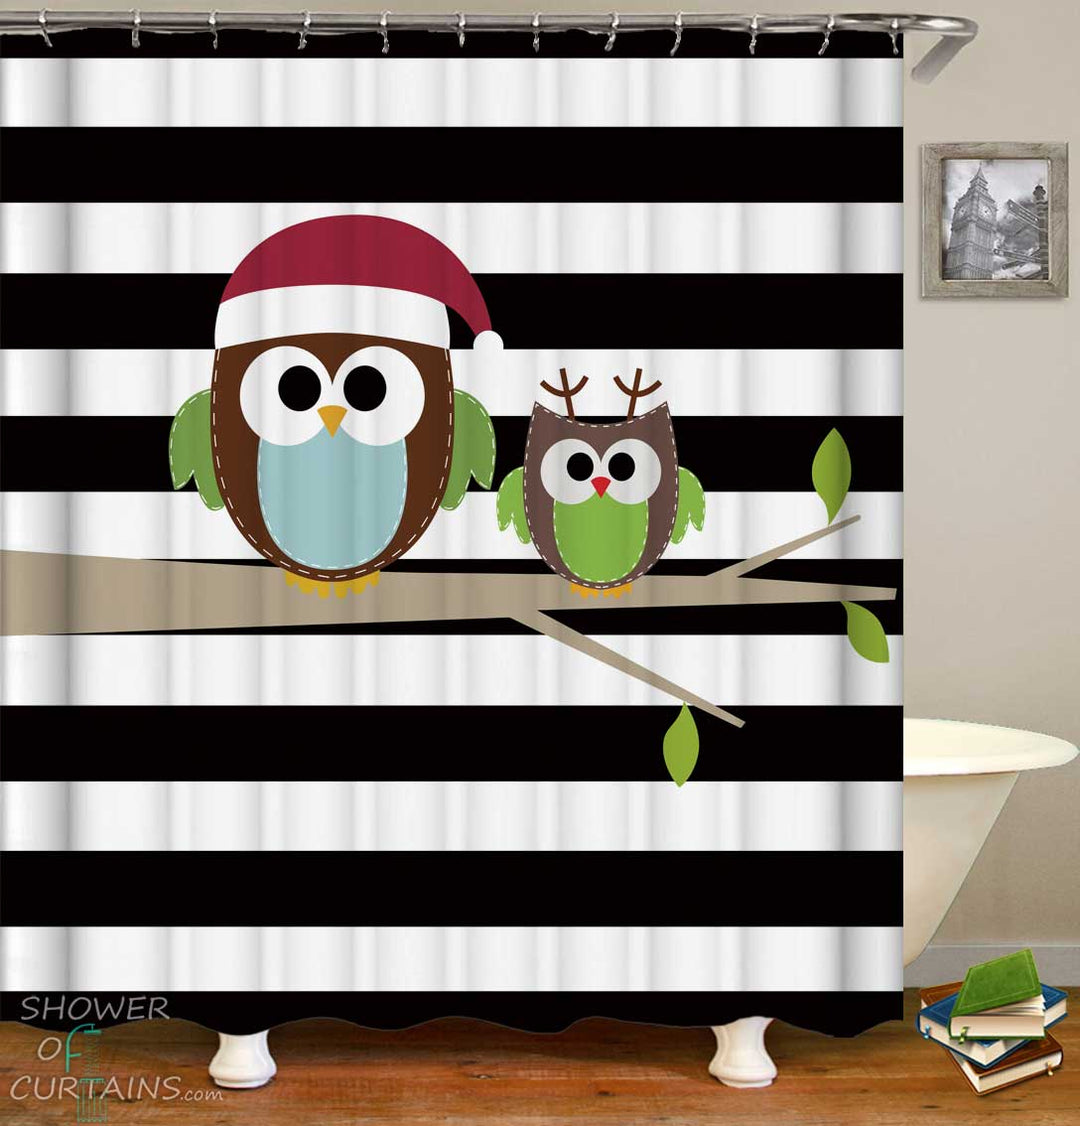 Shower Curtains with Cute Owls over Black and White Stripes